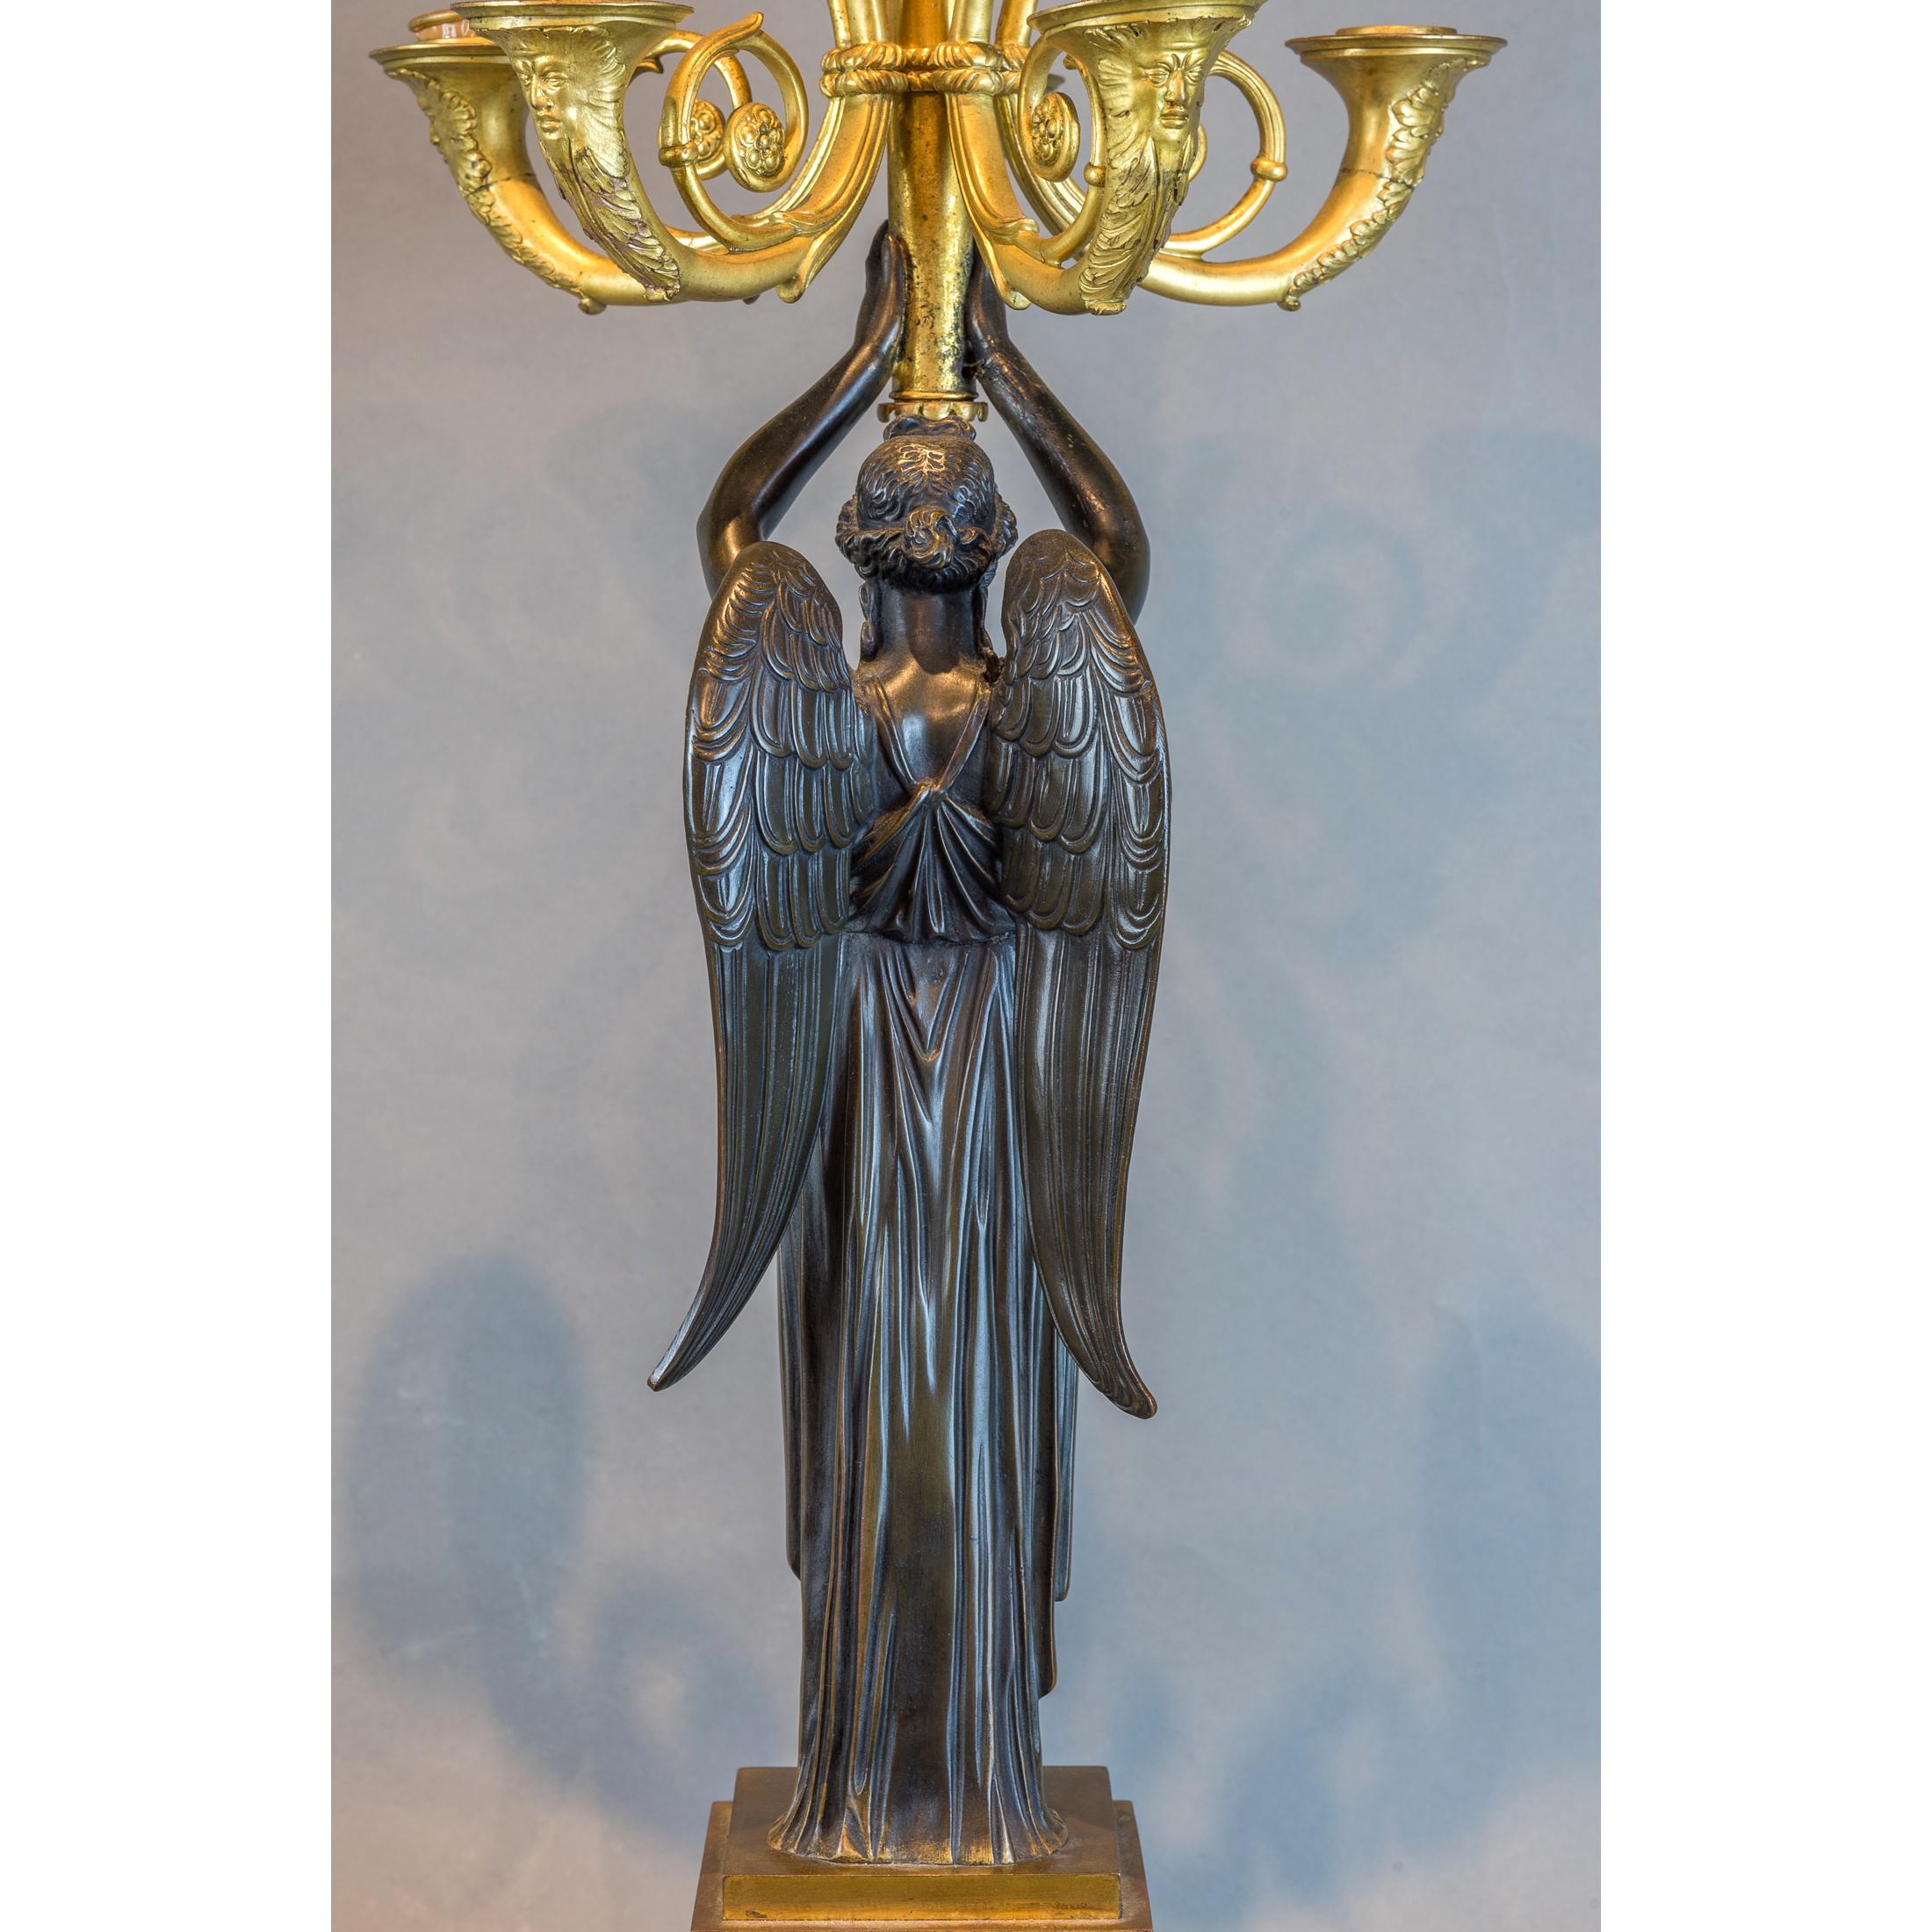  Pair of Empire Gilt and Patinated Bronze Six-Light Figural Candelabras In Good Condition For Sale In New York, NY